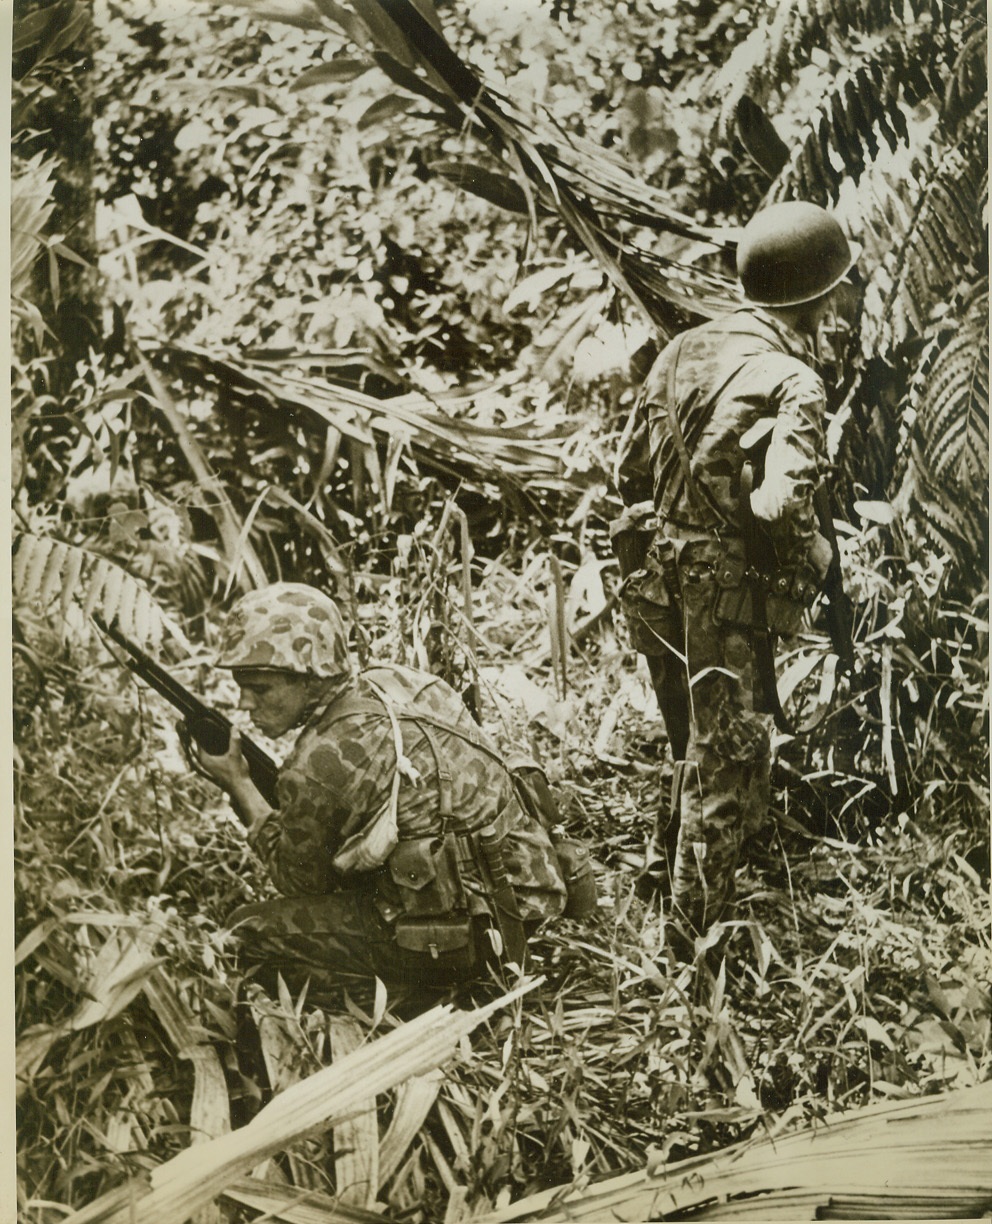 Part of the Jungle, 11/22/1943. SOUTH PACIFIC -- A pair of Marines fervently hope that they are indistinguishable from jungle foliage as one looks one way, and the other searches in the opposite direction, for a Jap sniper on Bougainville who apparently is a well-hidden as they are. With rifles "on the ready", they crouch at the side of a jungle trail.  Credit: (ACME);